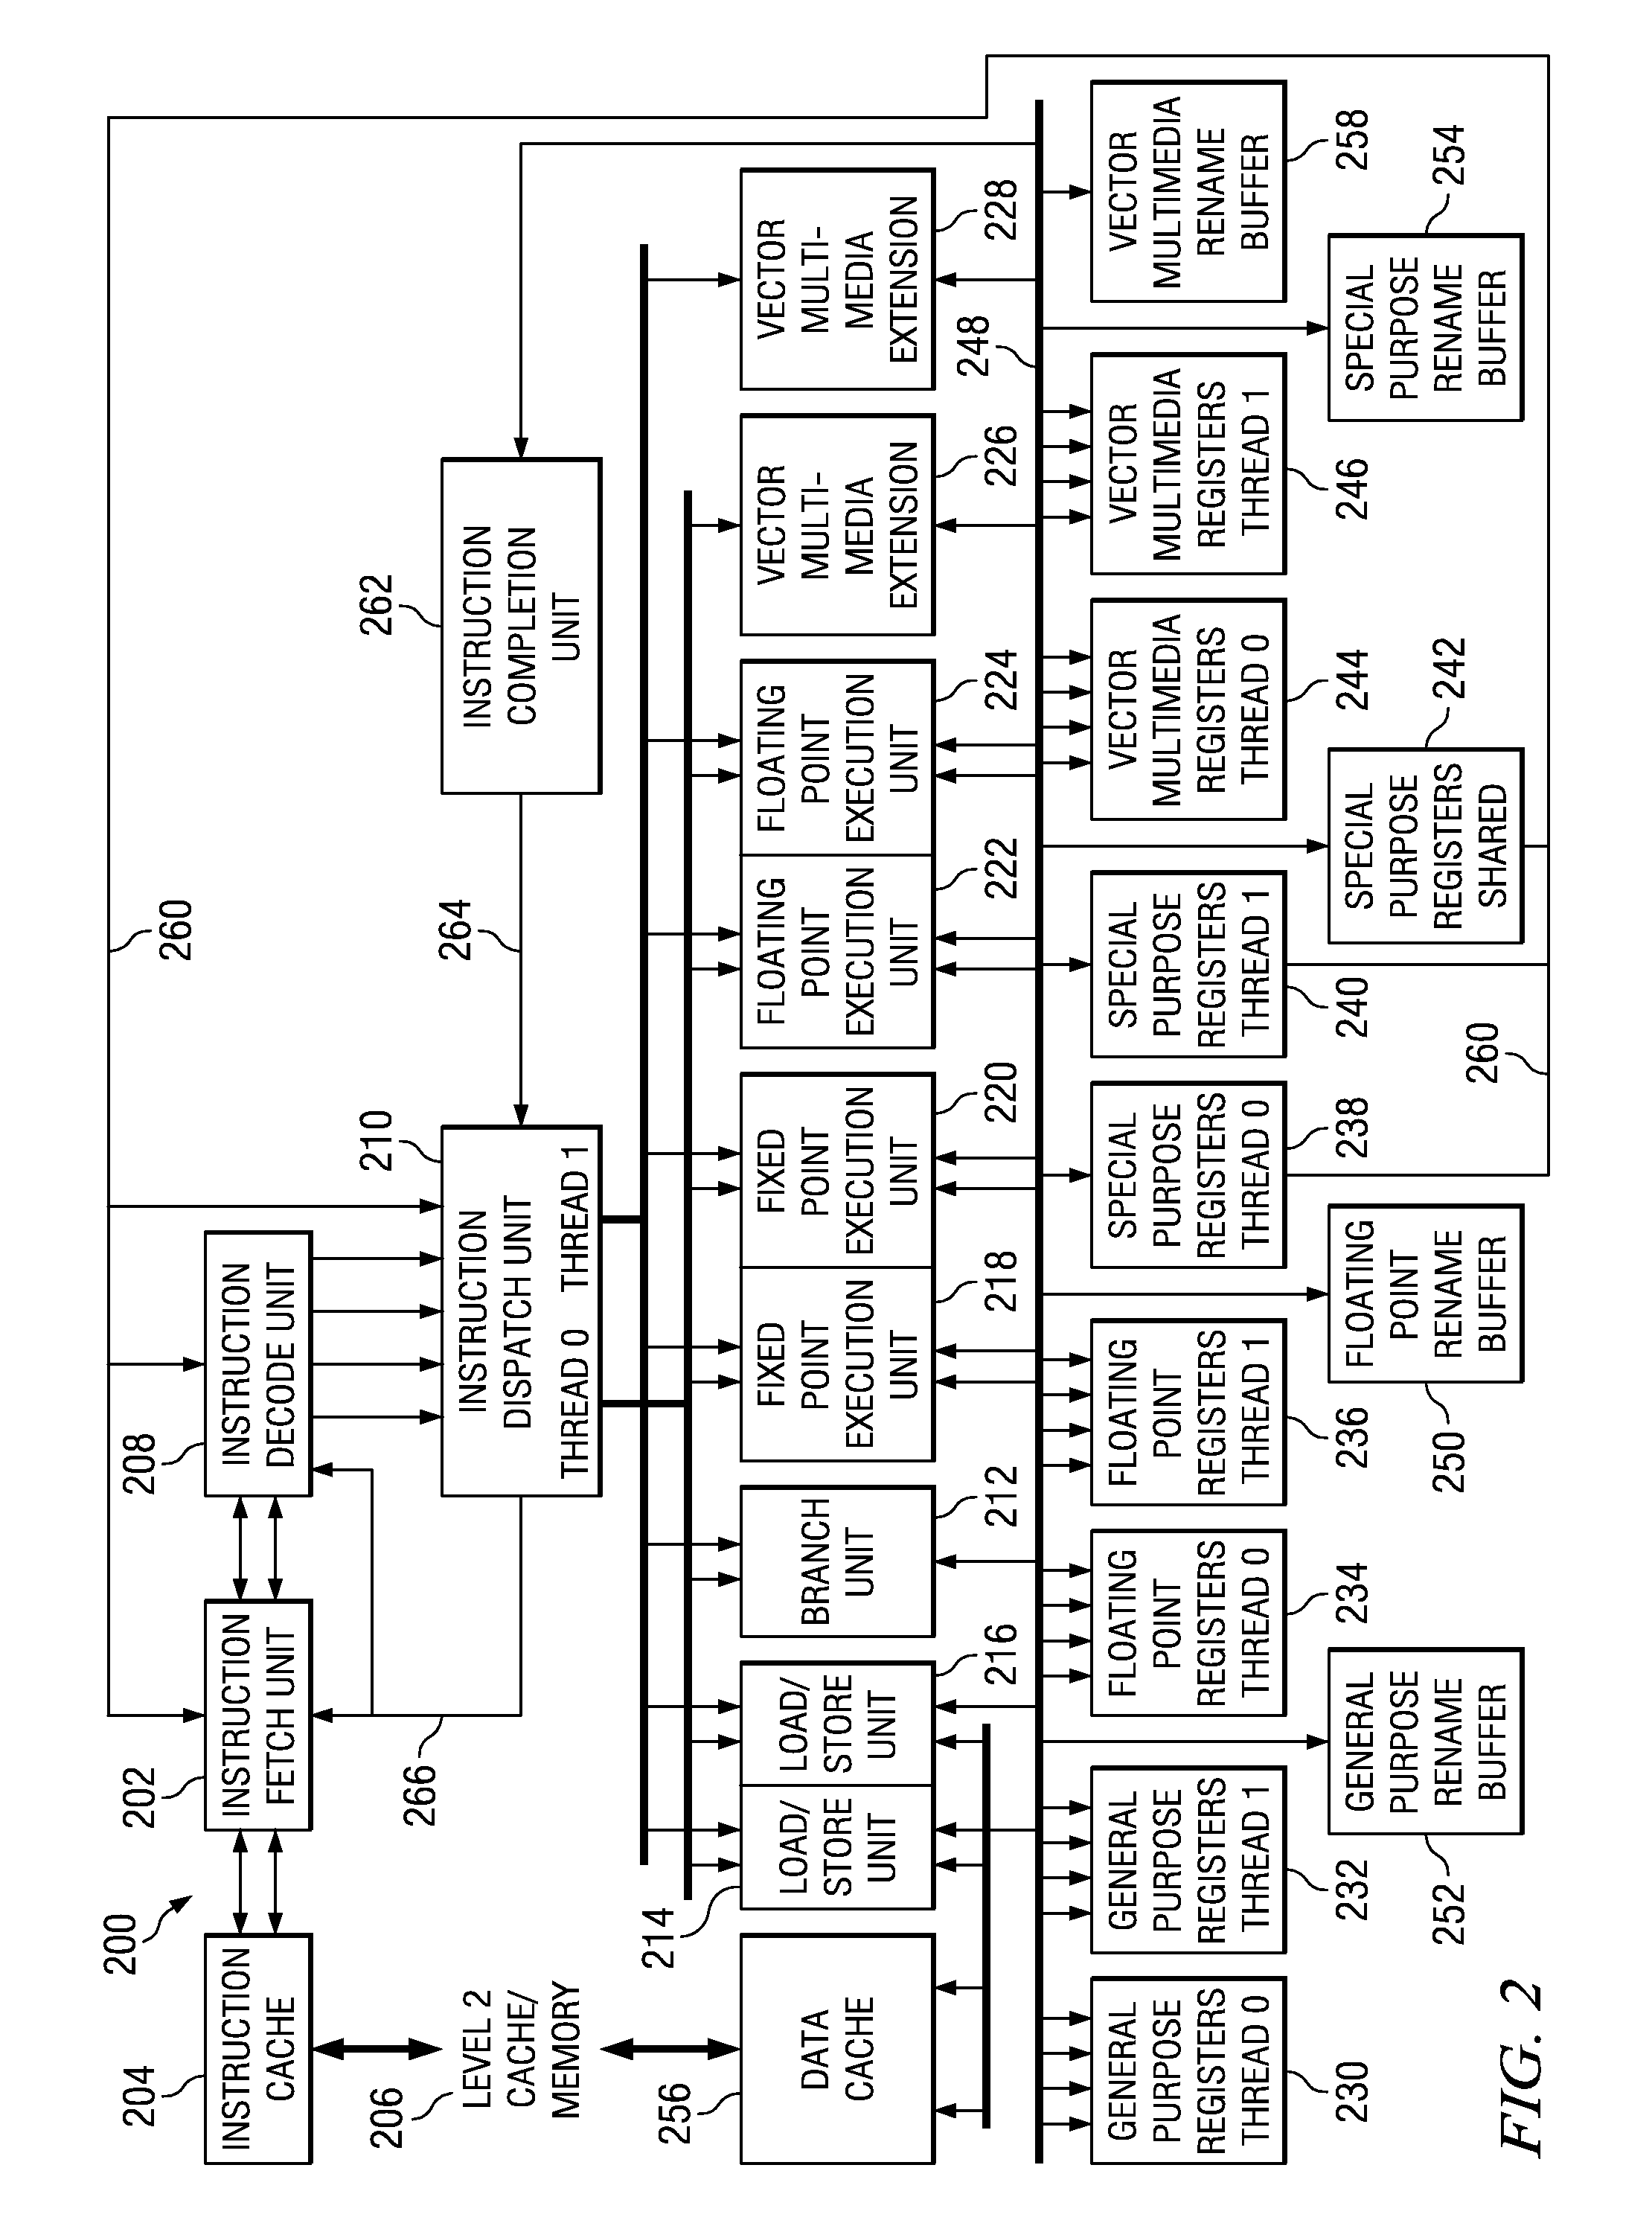 Efficient and Self-Balancing Verification of Multi-Threaded Microprocessors